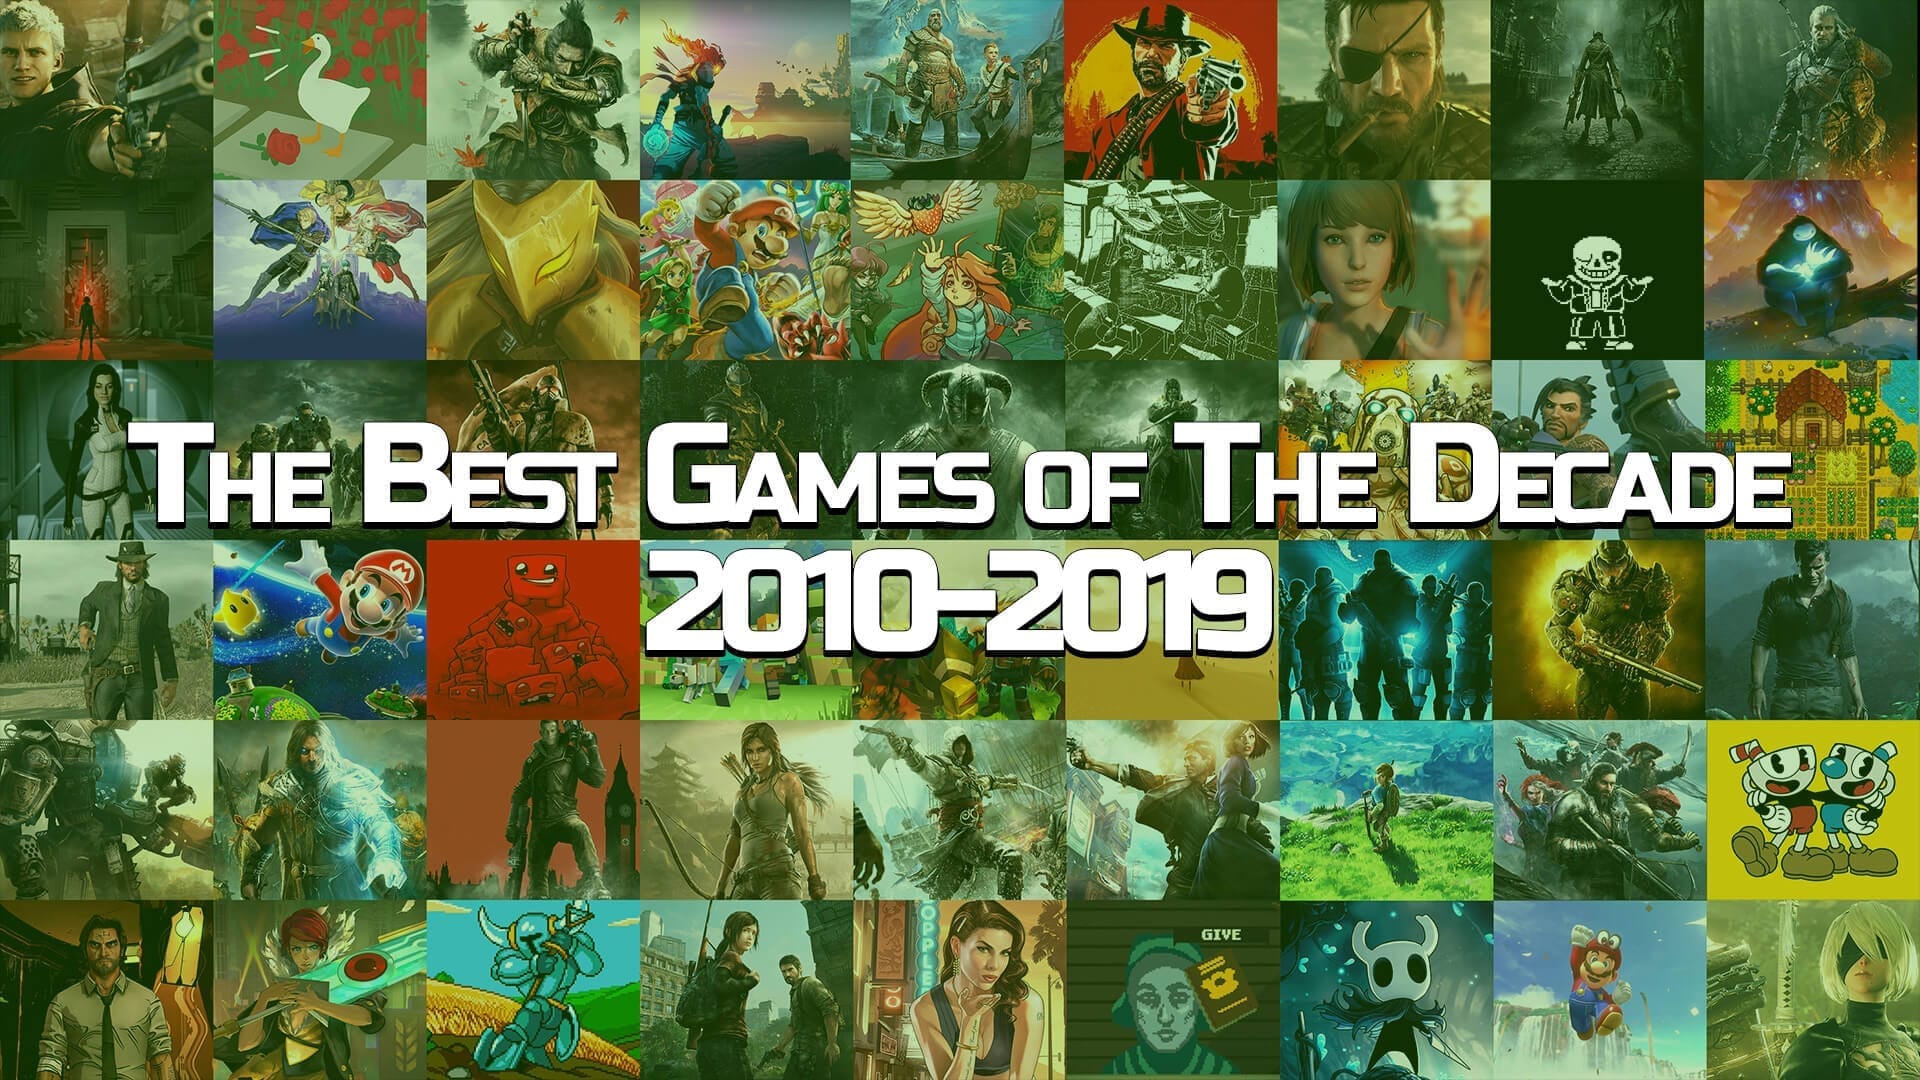 list of 2010s video games